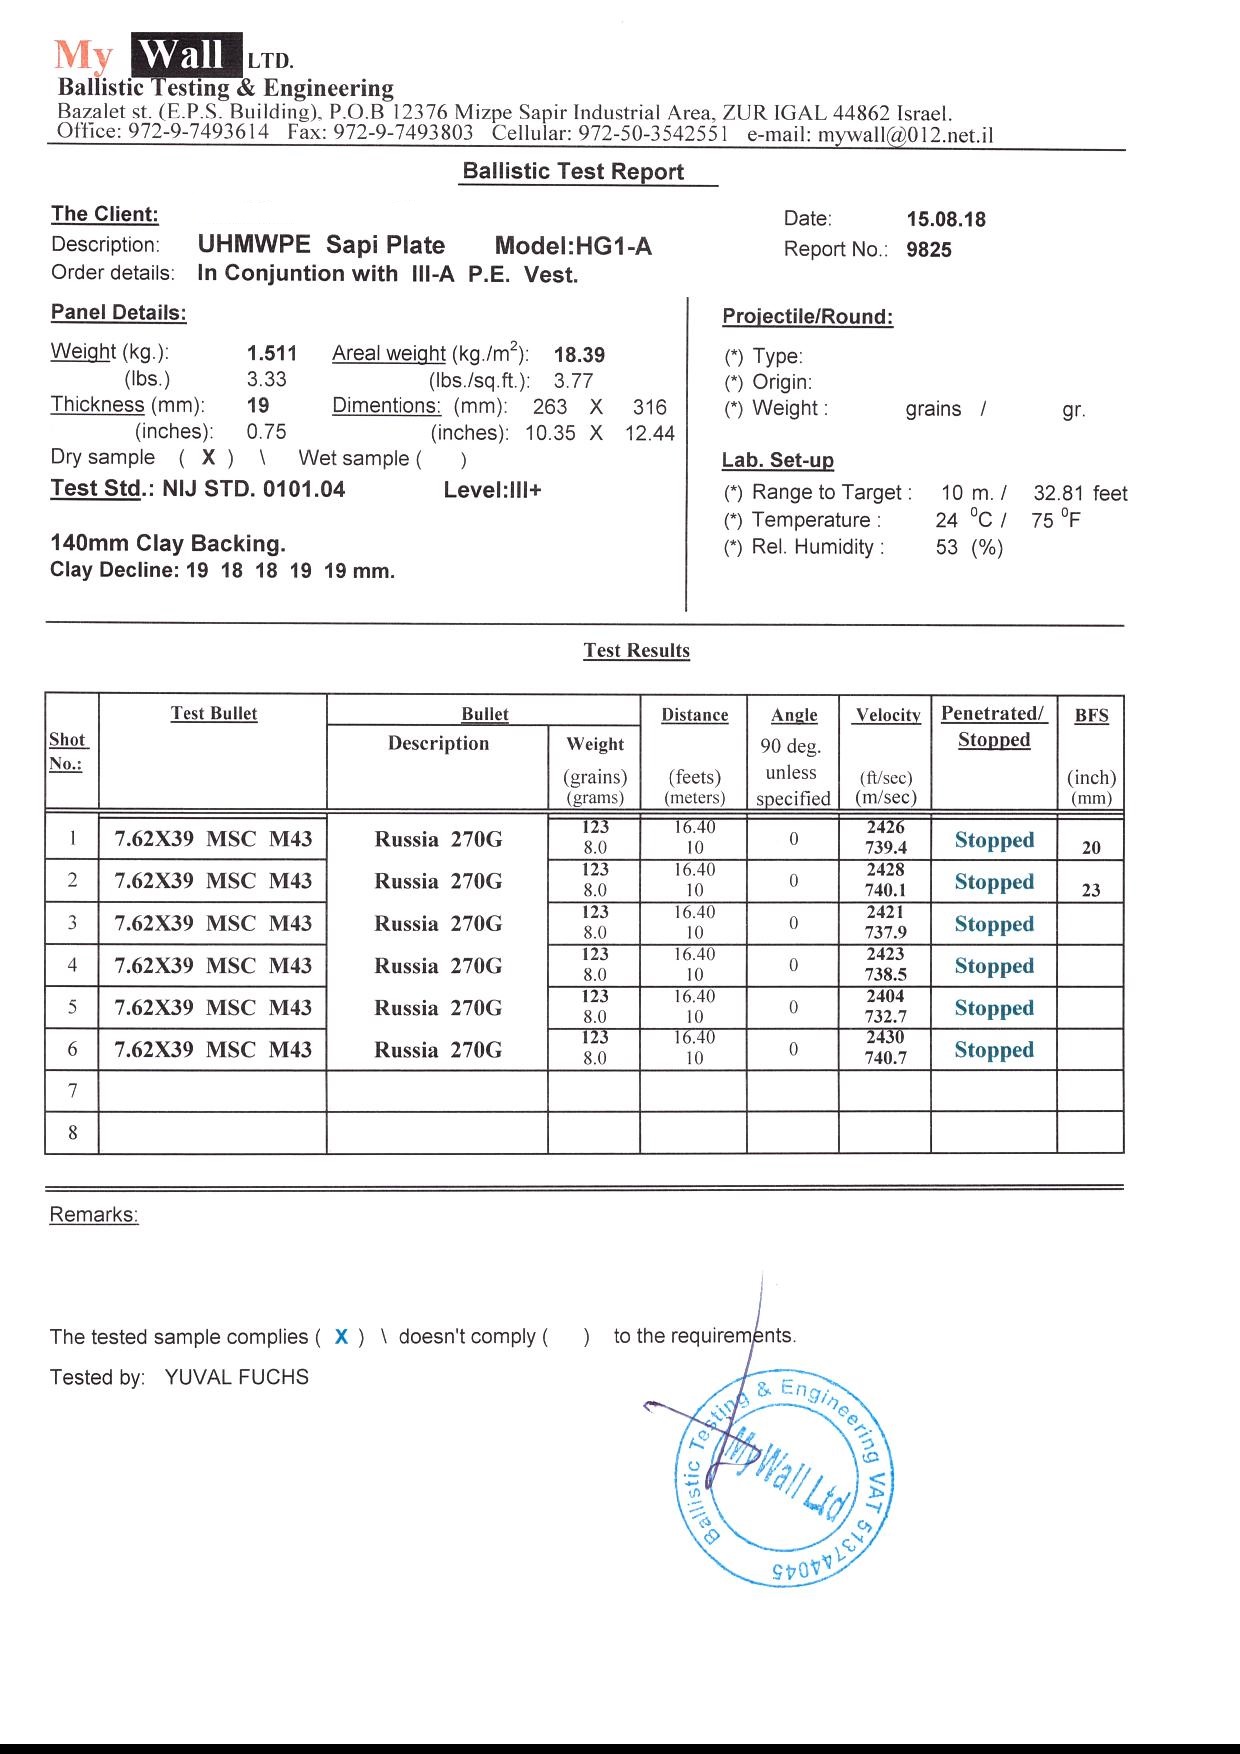 level 3+ plate test results